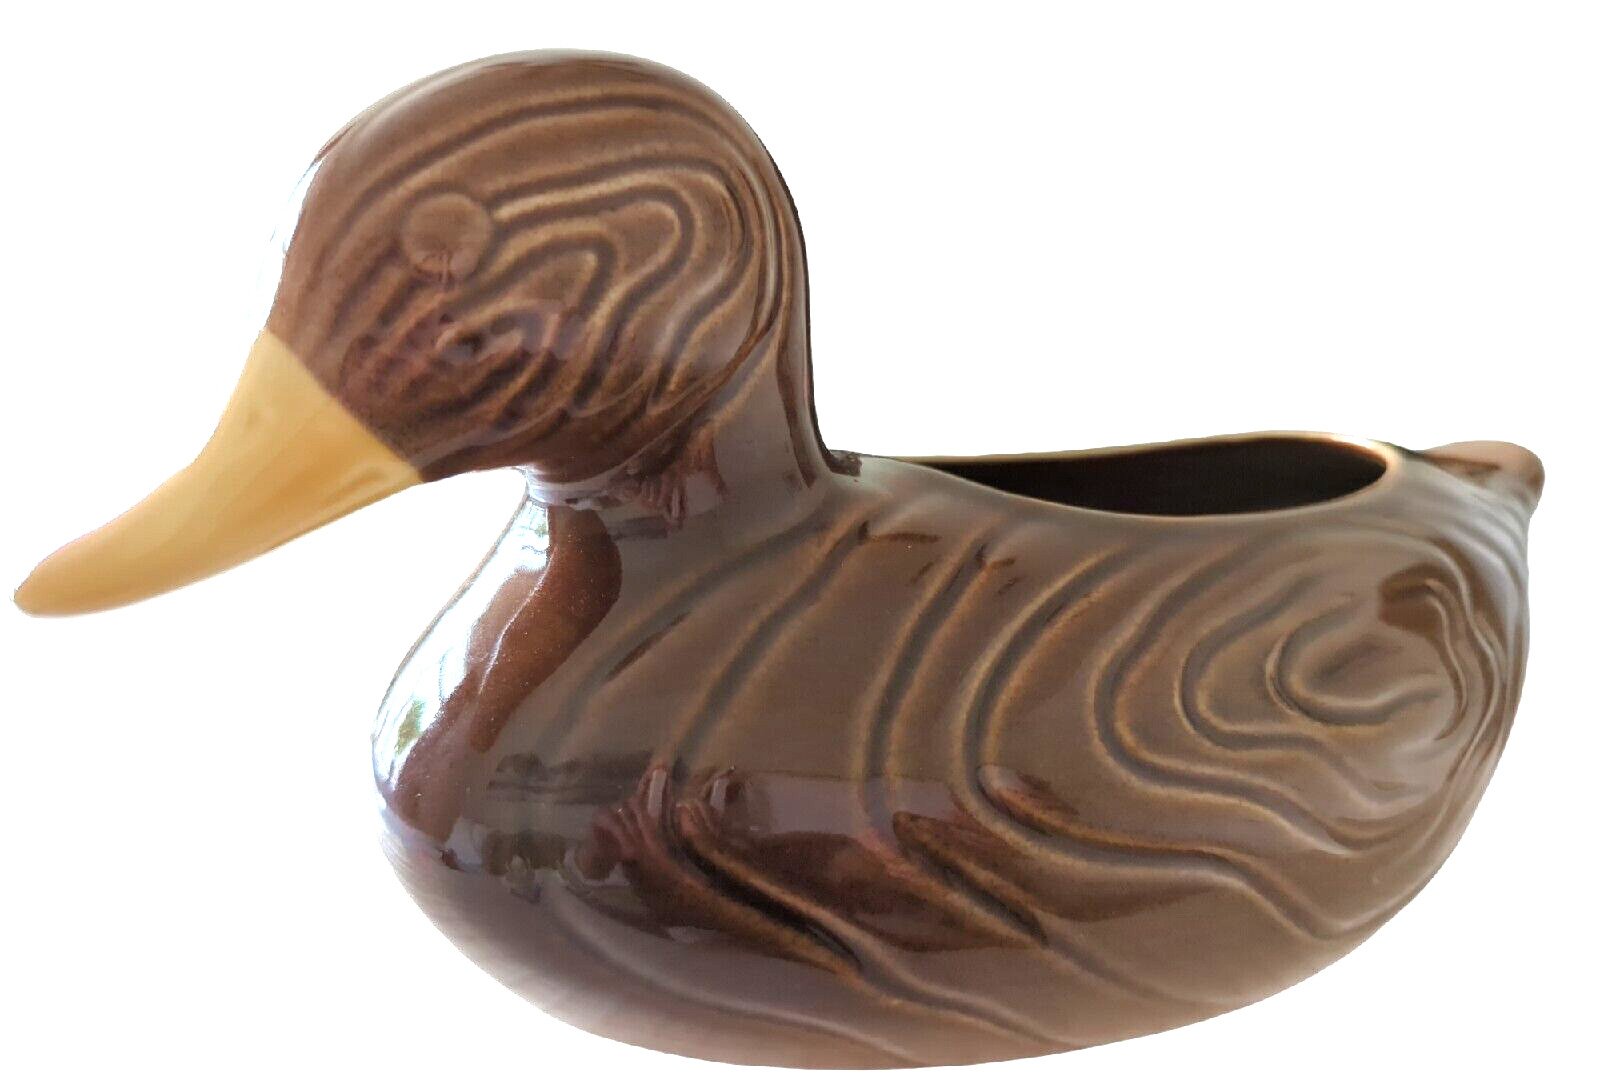 Vintage Duck Planter Brown Glazed Ceramic Created For FTD™ In The USA 1983 Clean